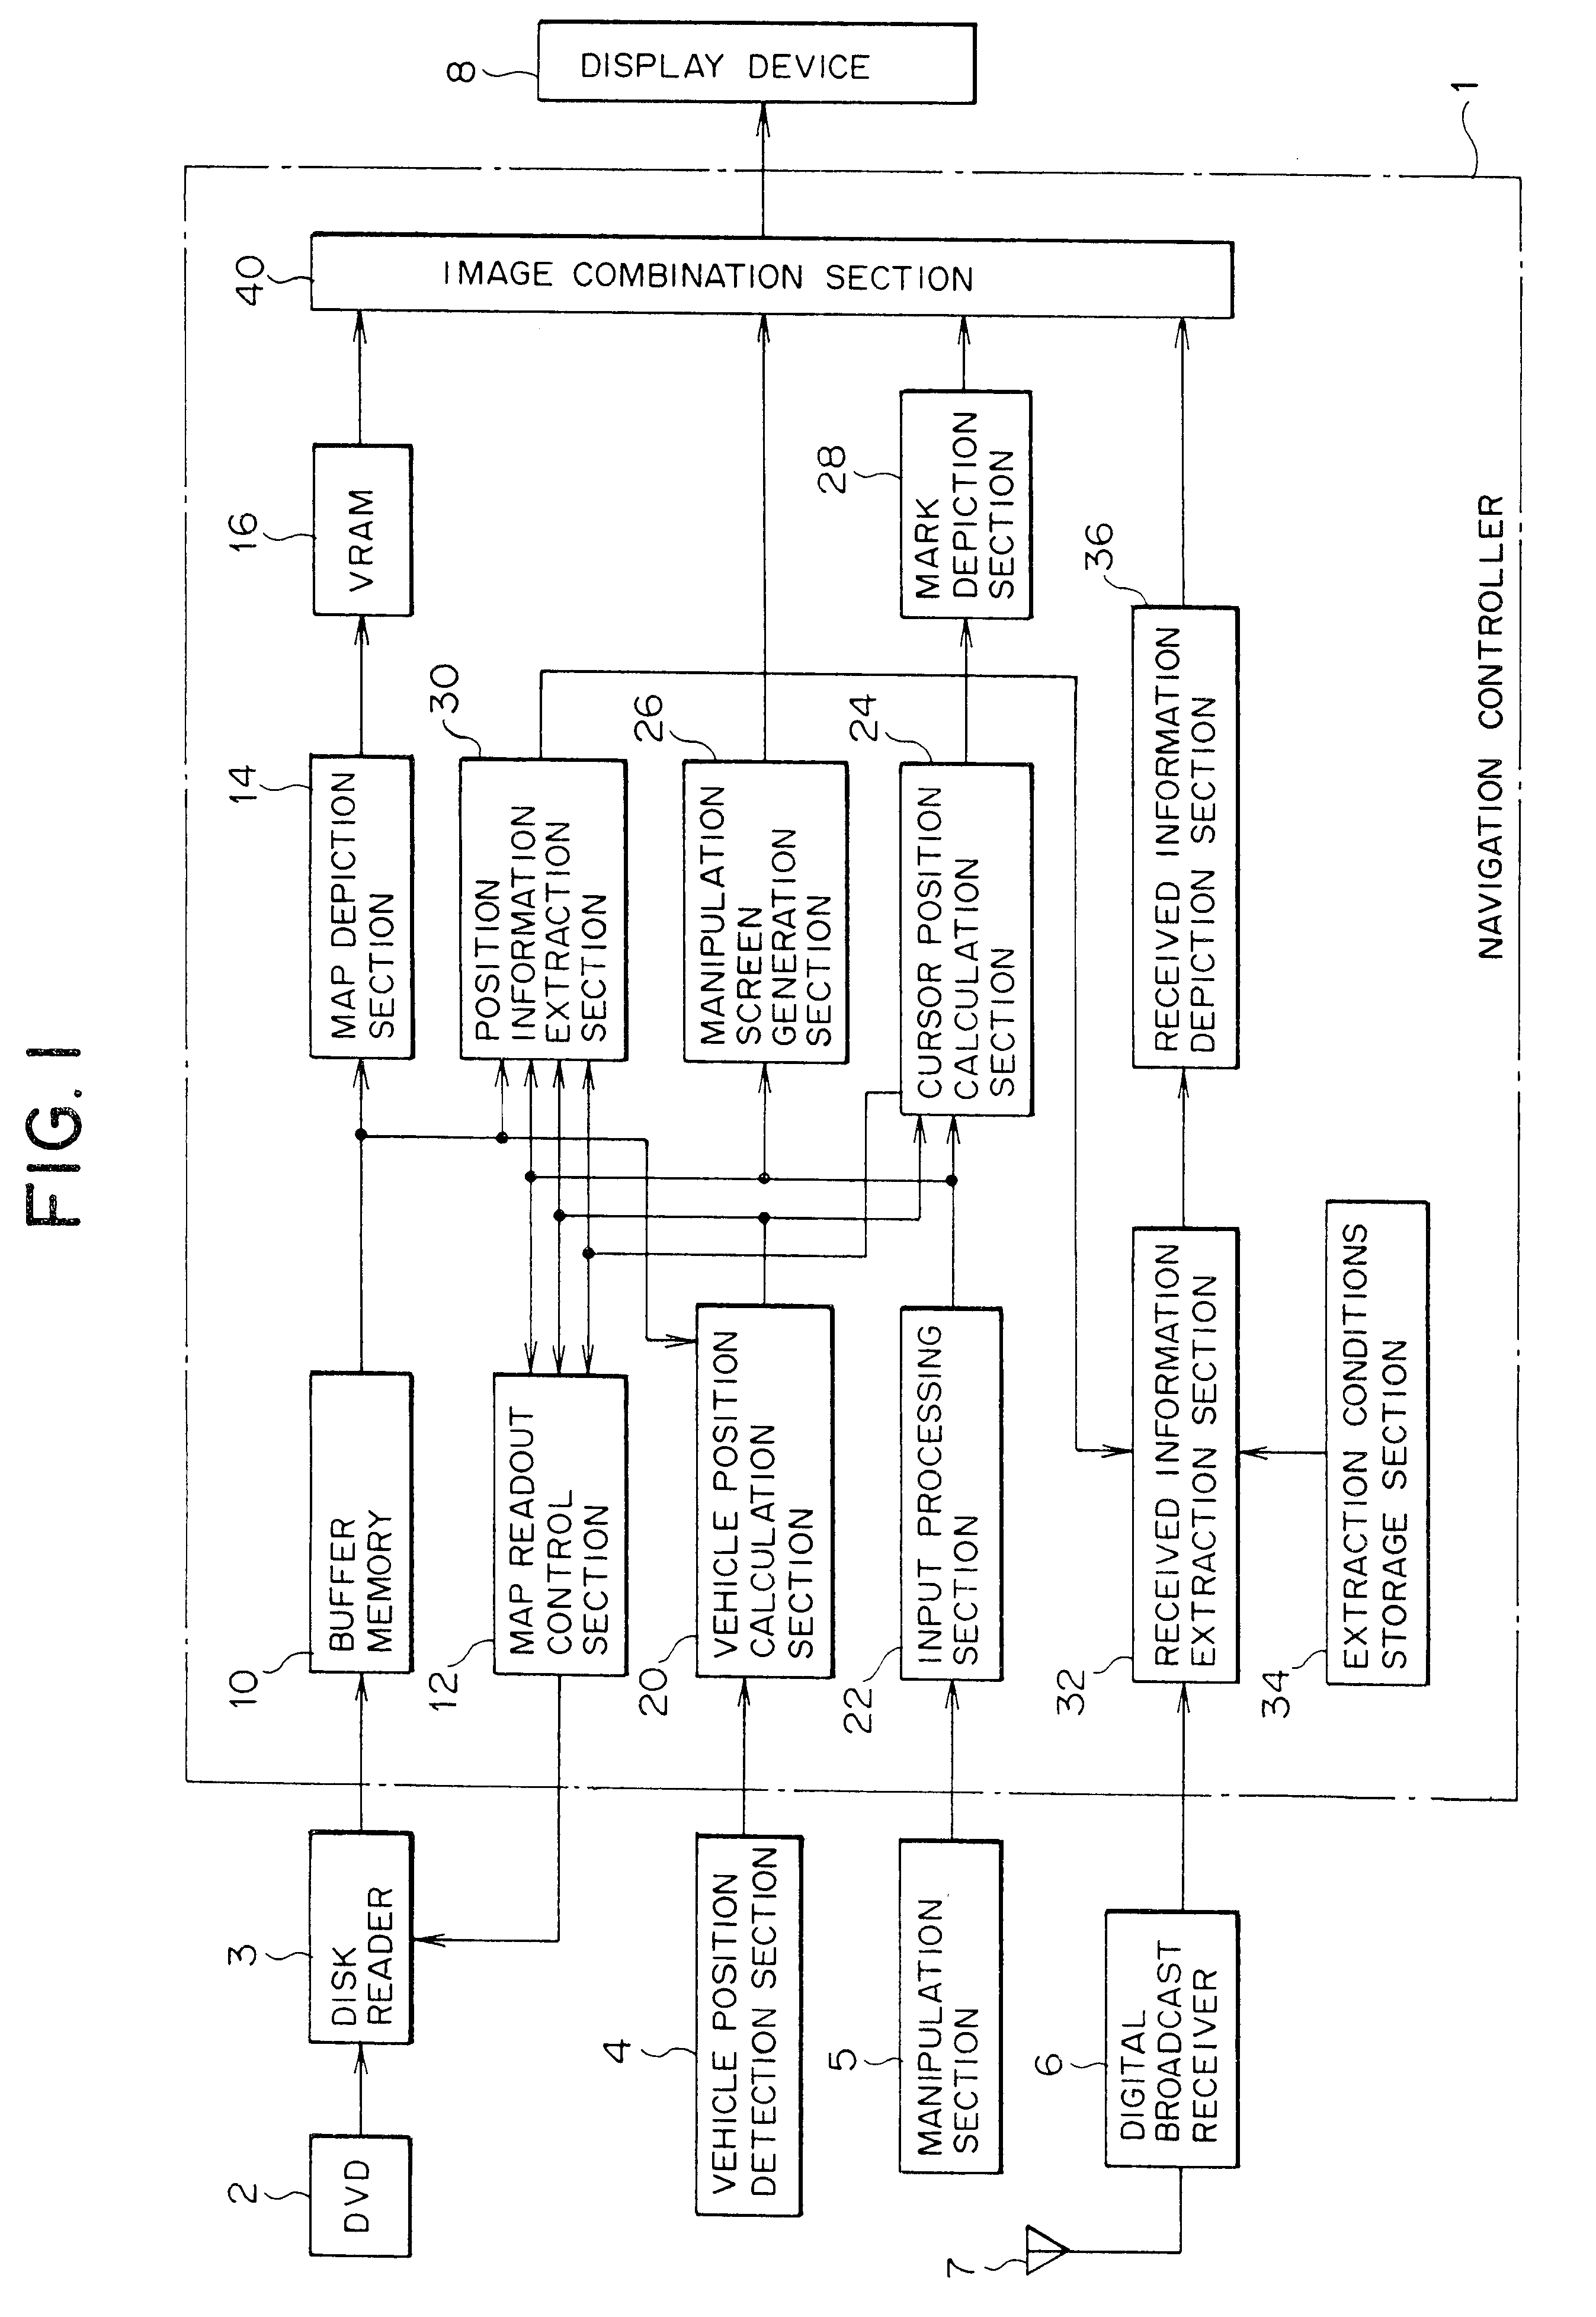 Received information processing apparatus